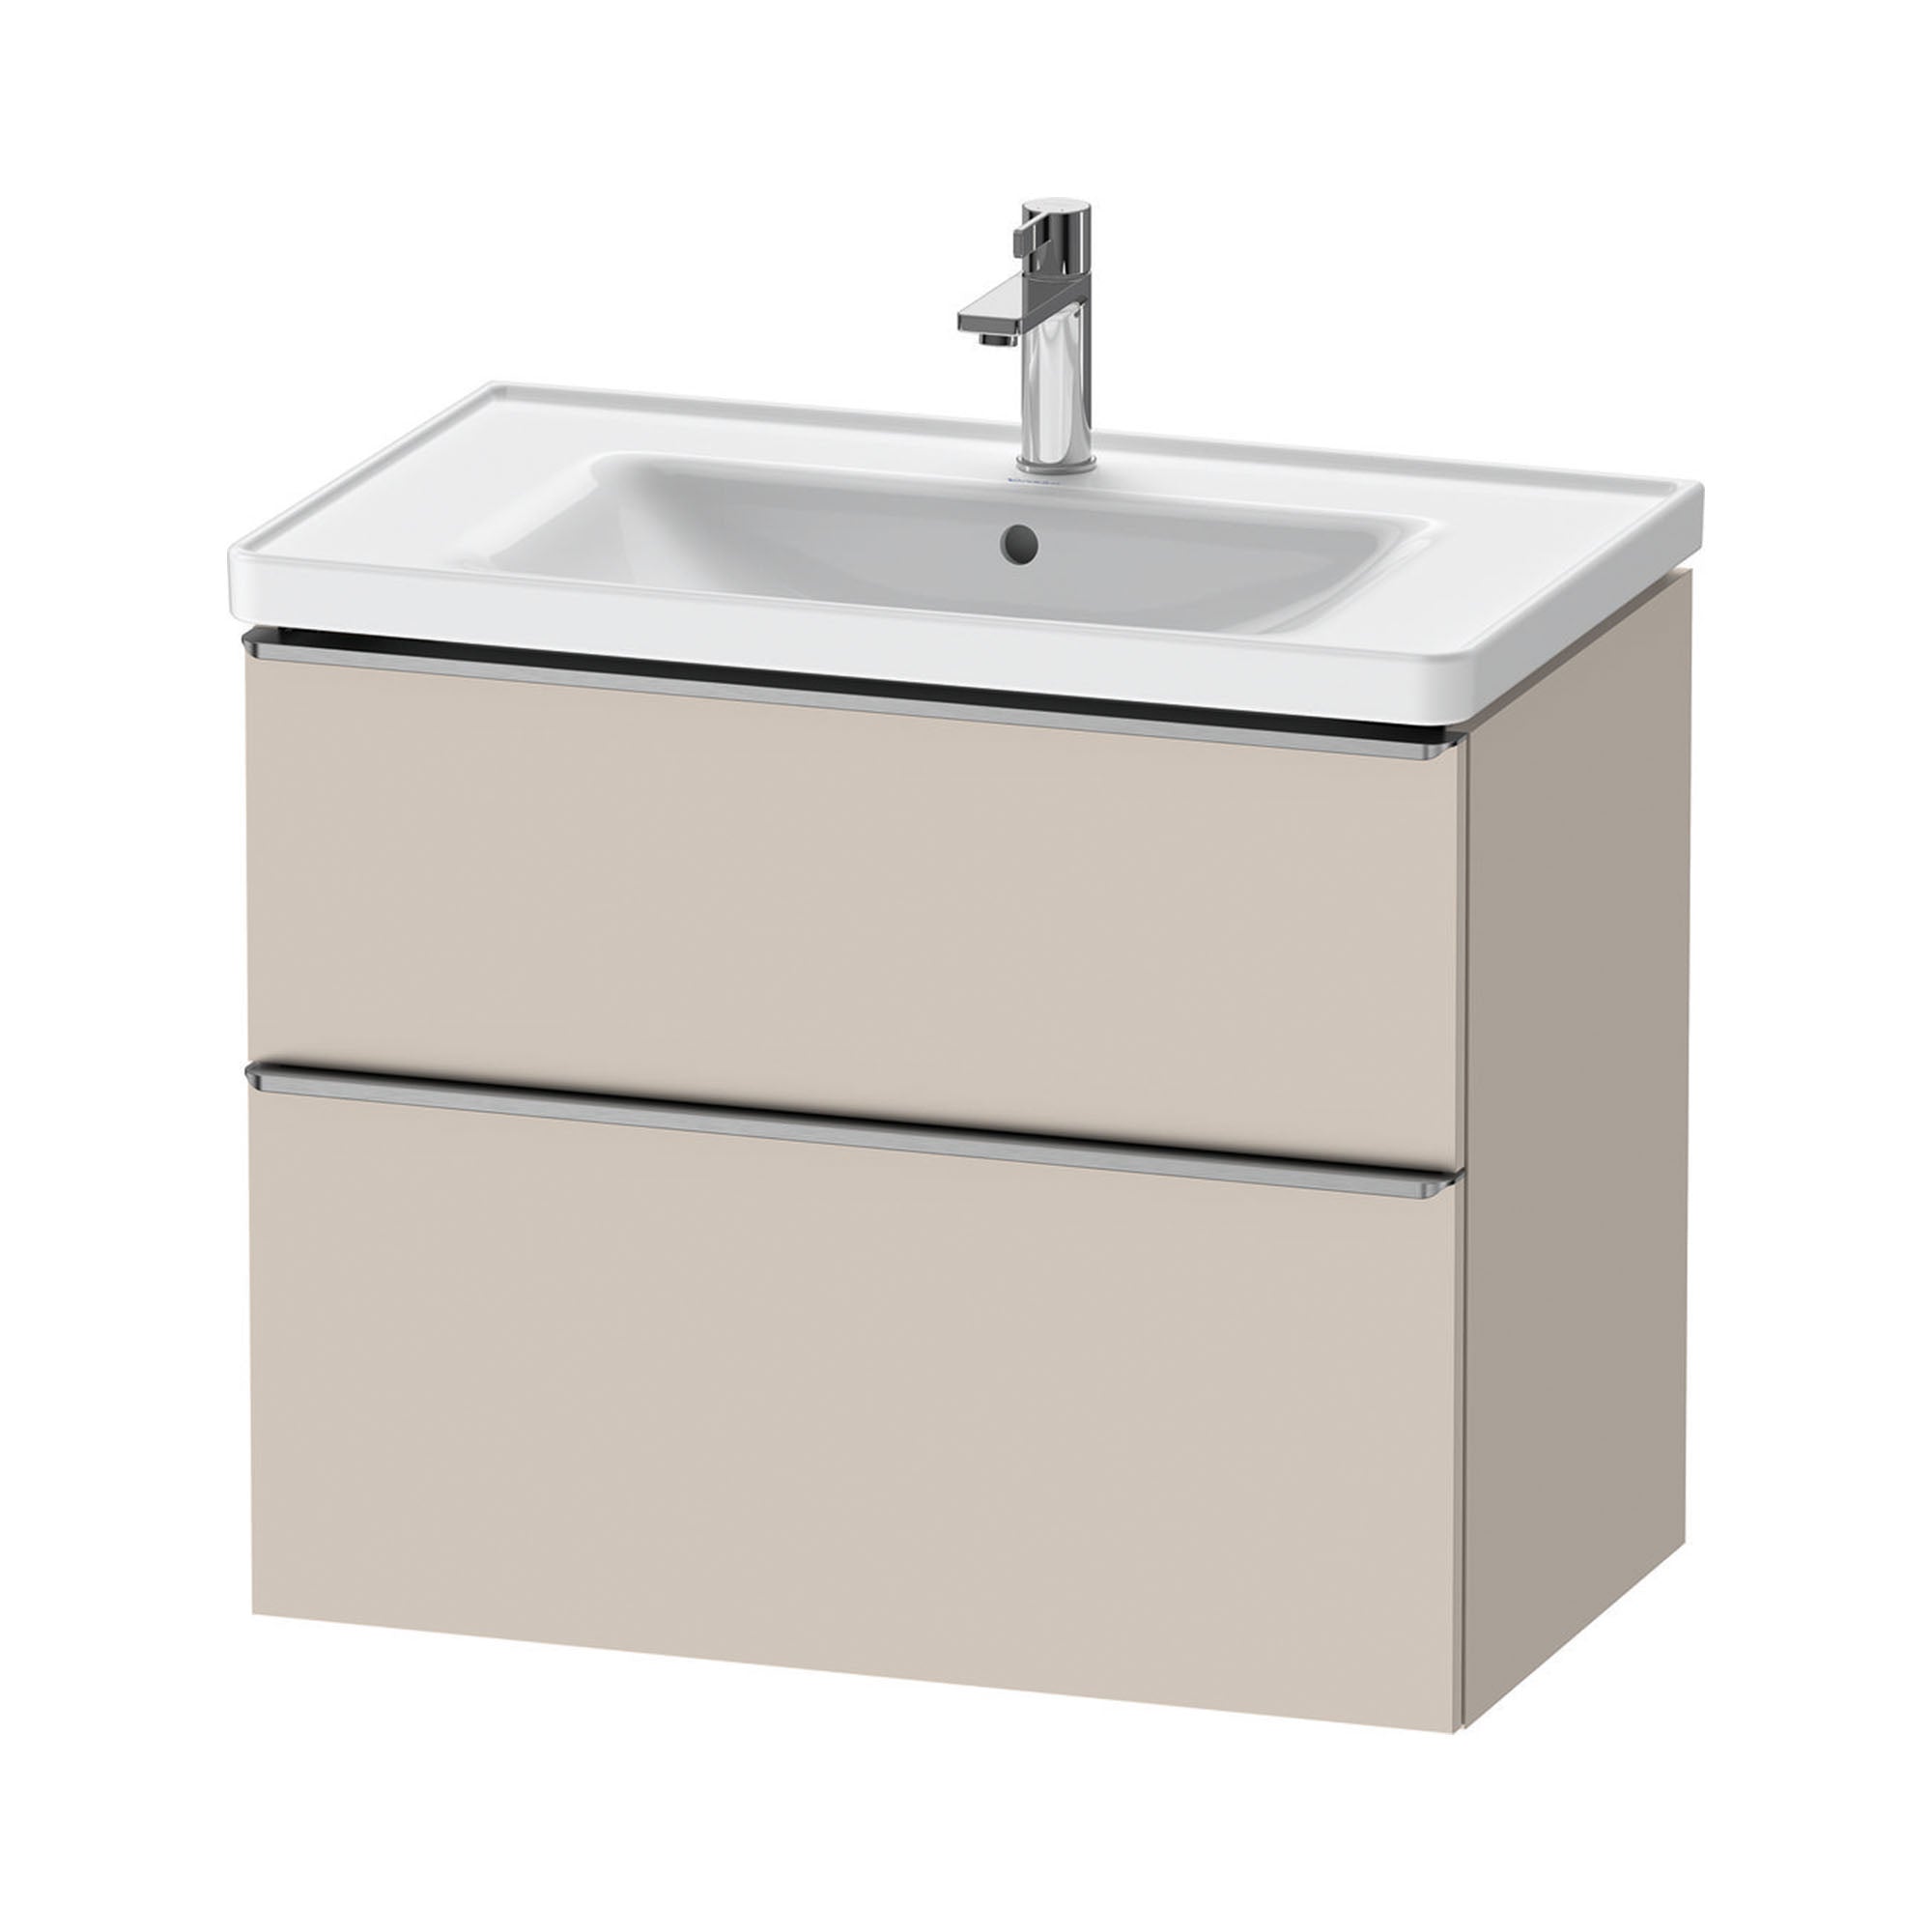 duravit d-neo 800mm wall mounted vanity unit with d-neo basin taupe stainless steel handles